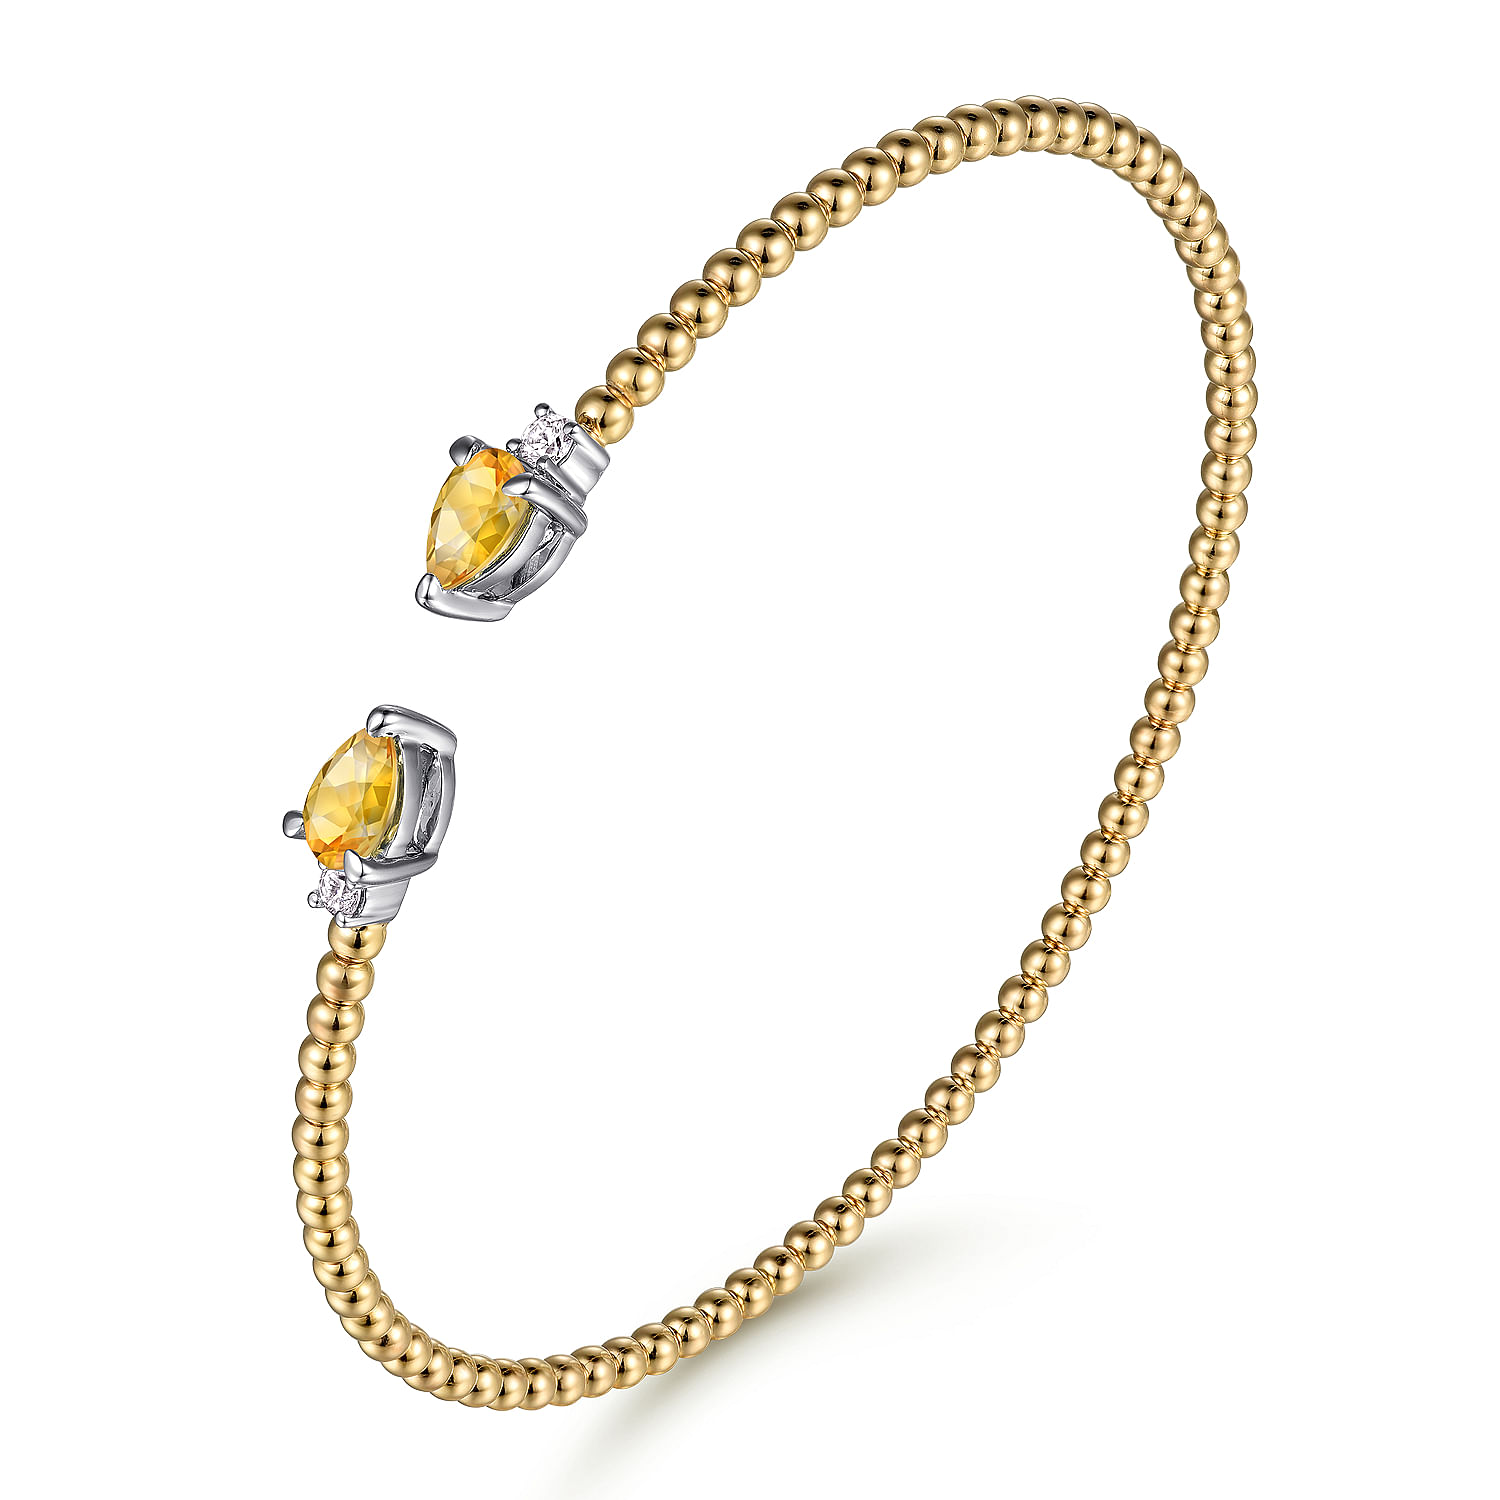 14K White & Yellow Gold Bujukan Open Cuff Bracelet with Citrine and Diamond End Caps